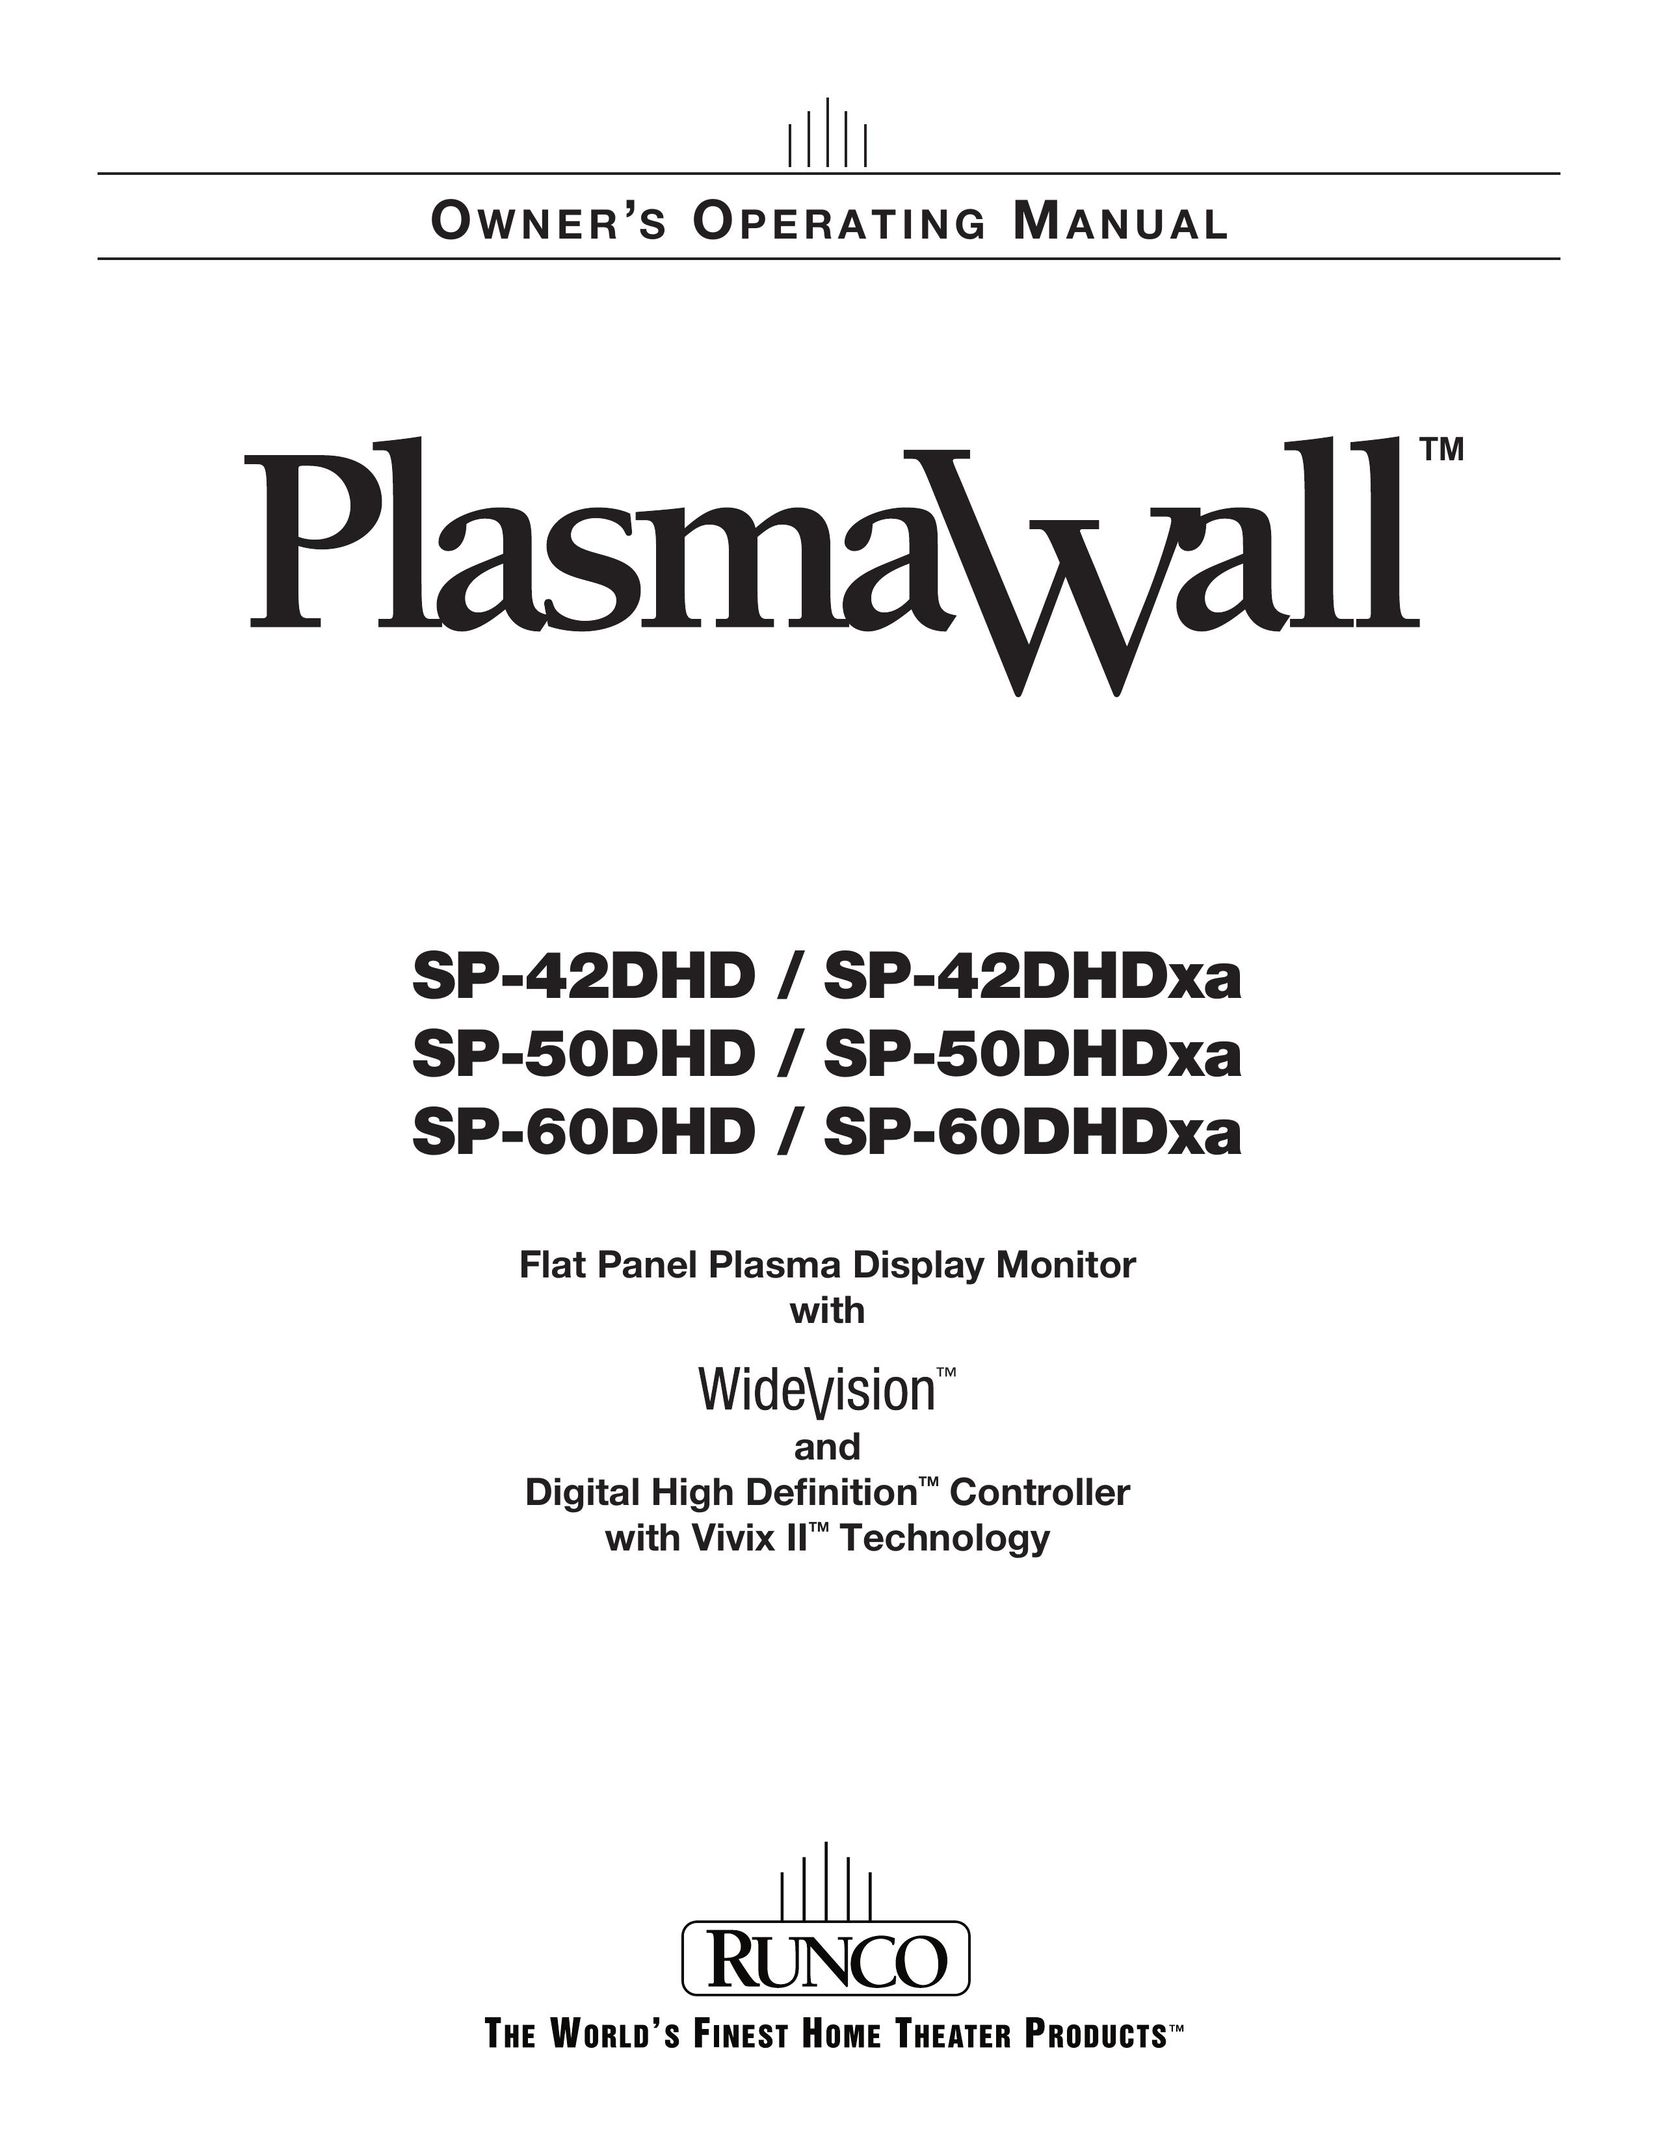 Runco SP-50DHD / SP-50DHDXA Flat Panel Television User Manual